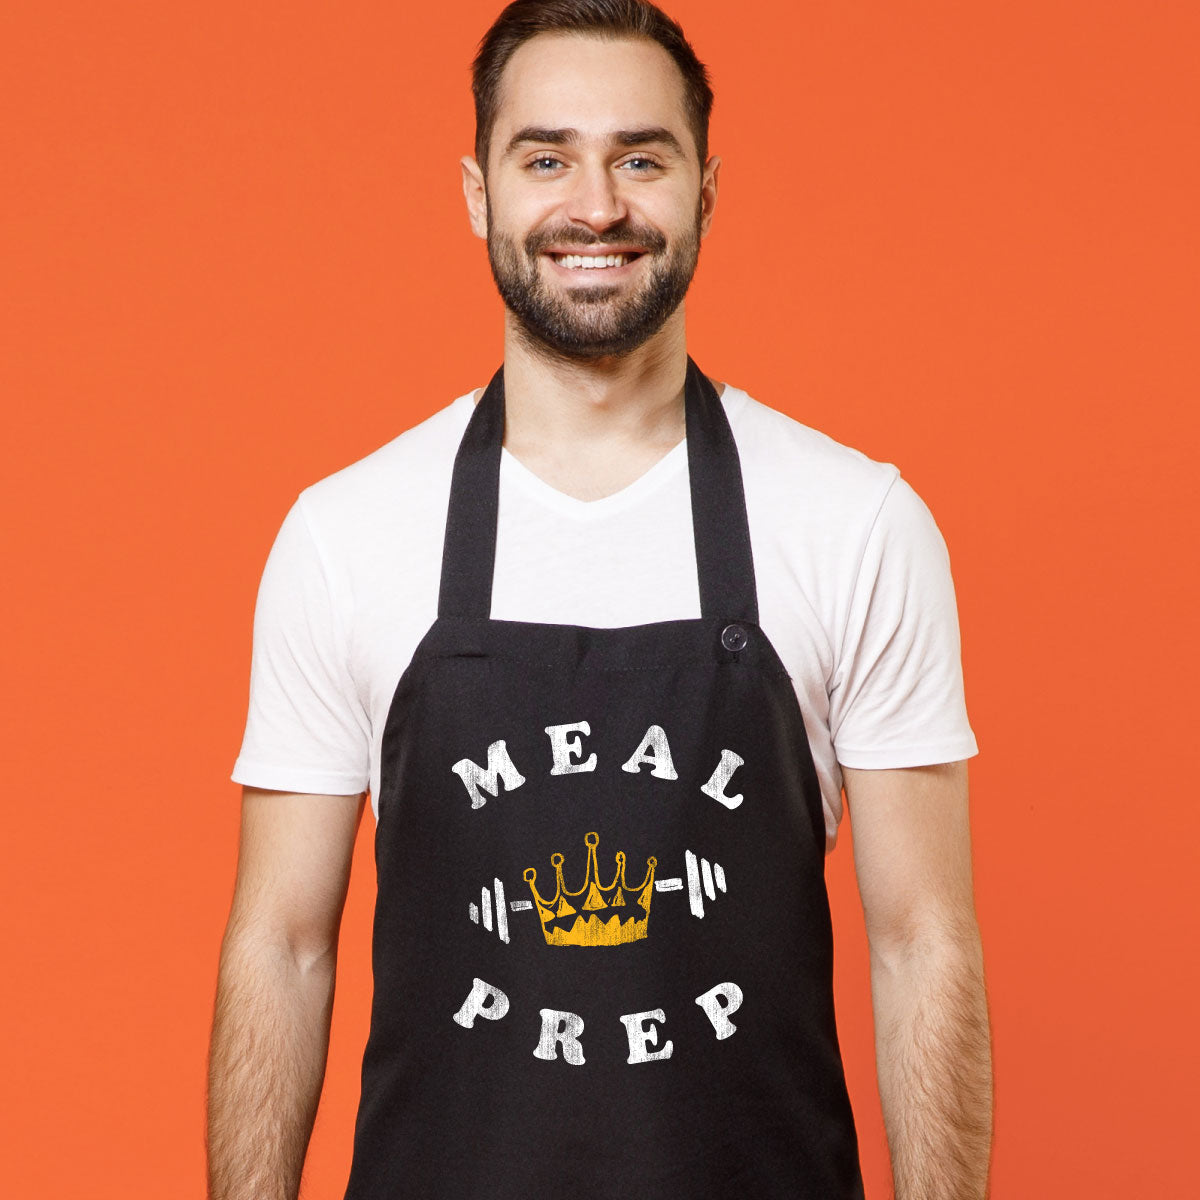 Meal Prep King Full-Length Apron with Pockets